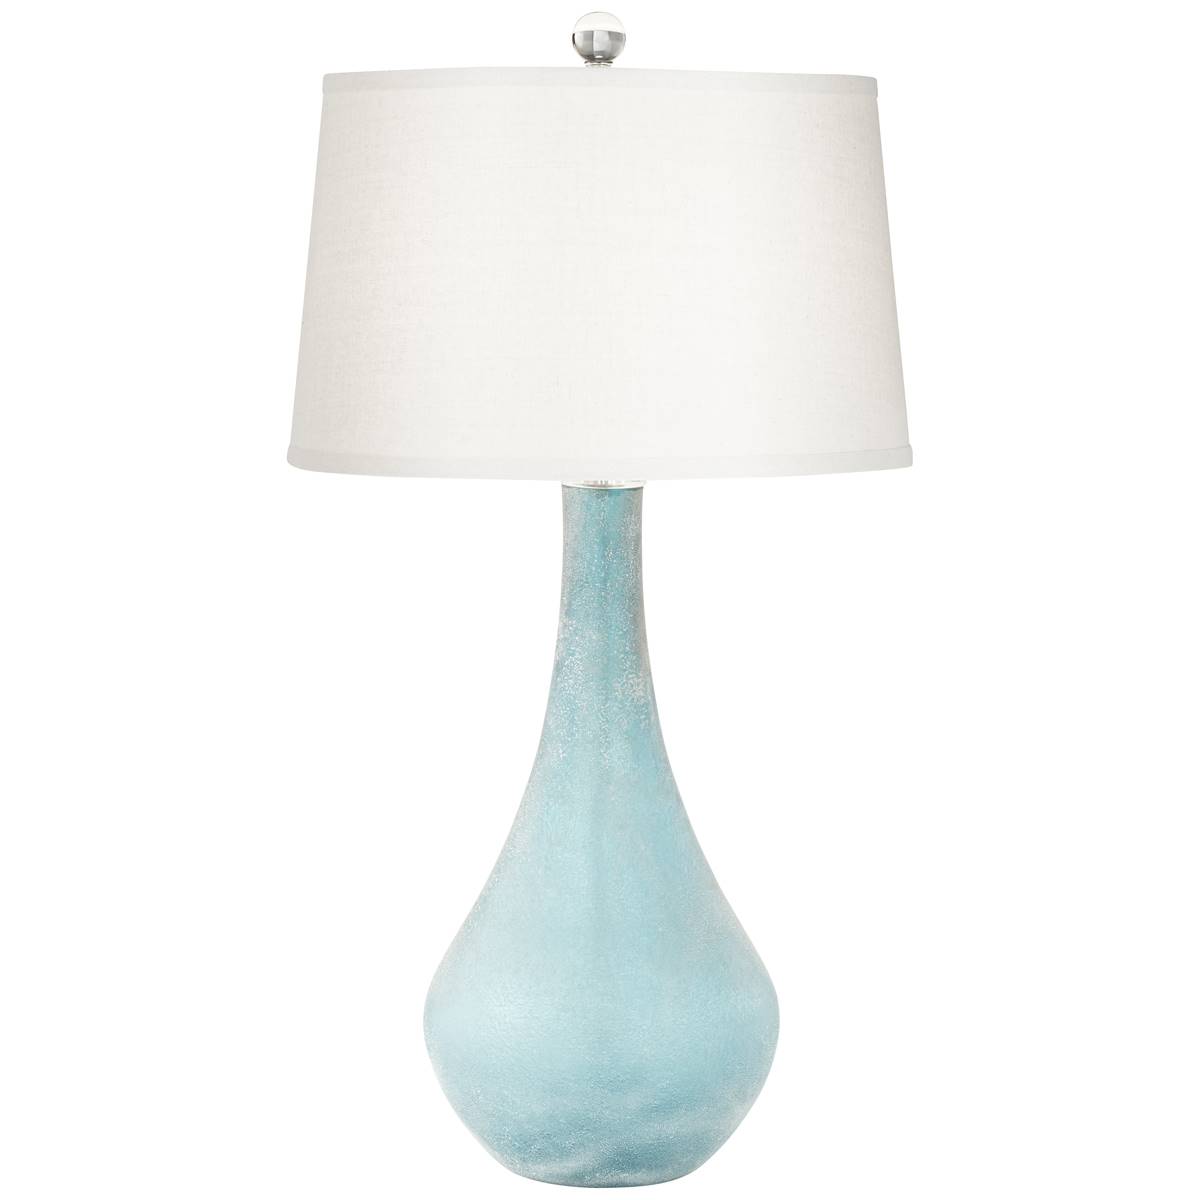 Pacific Coast Lighting City Shadow 30in. Teal Blue Table Lamp